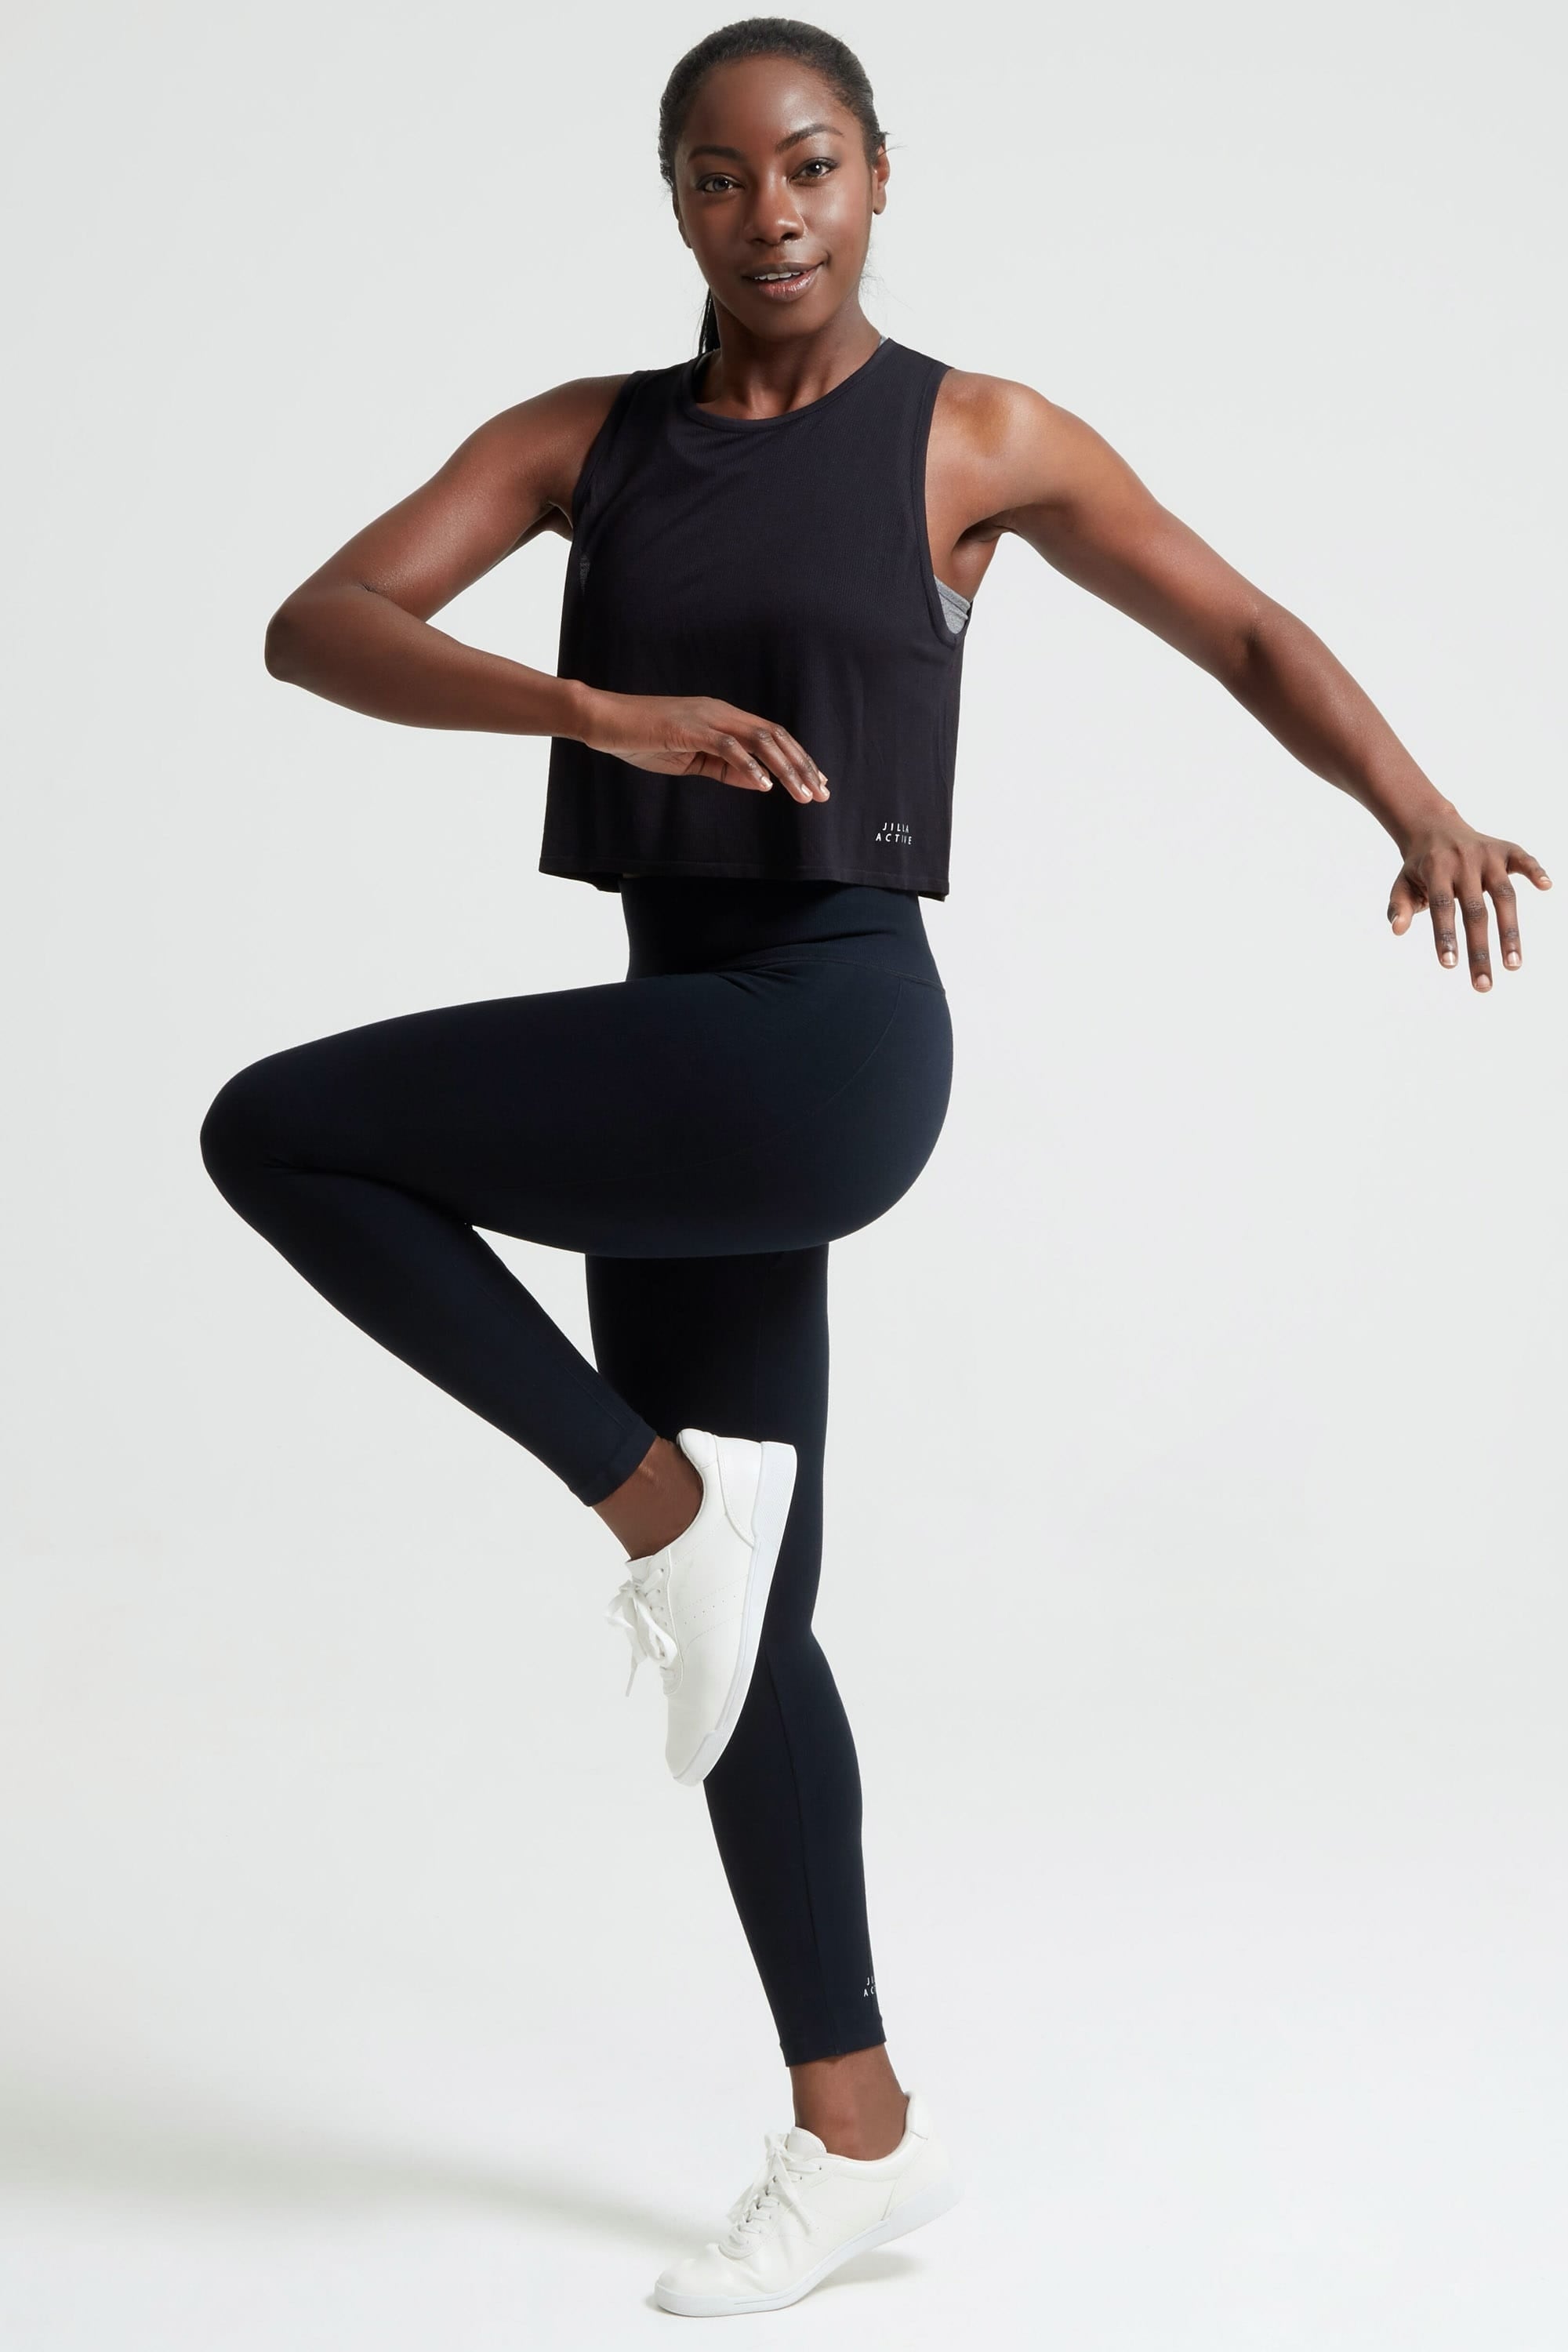 Model wearing black leggings and black sports yoga top for sustainable activewear brand, Jilla.  